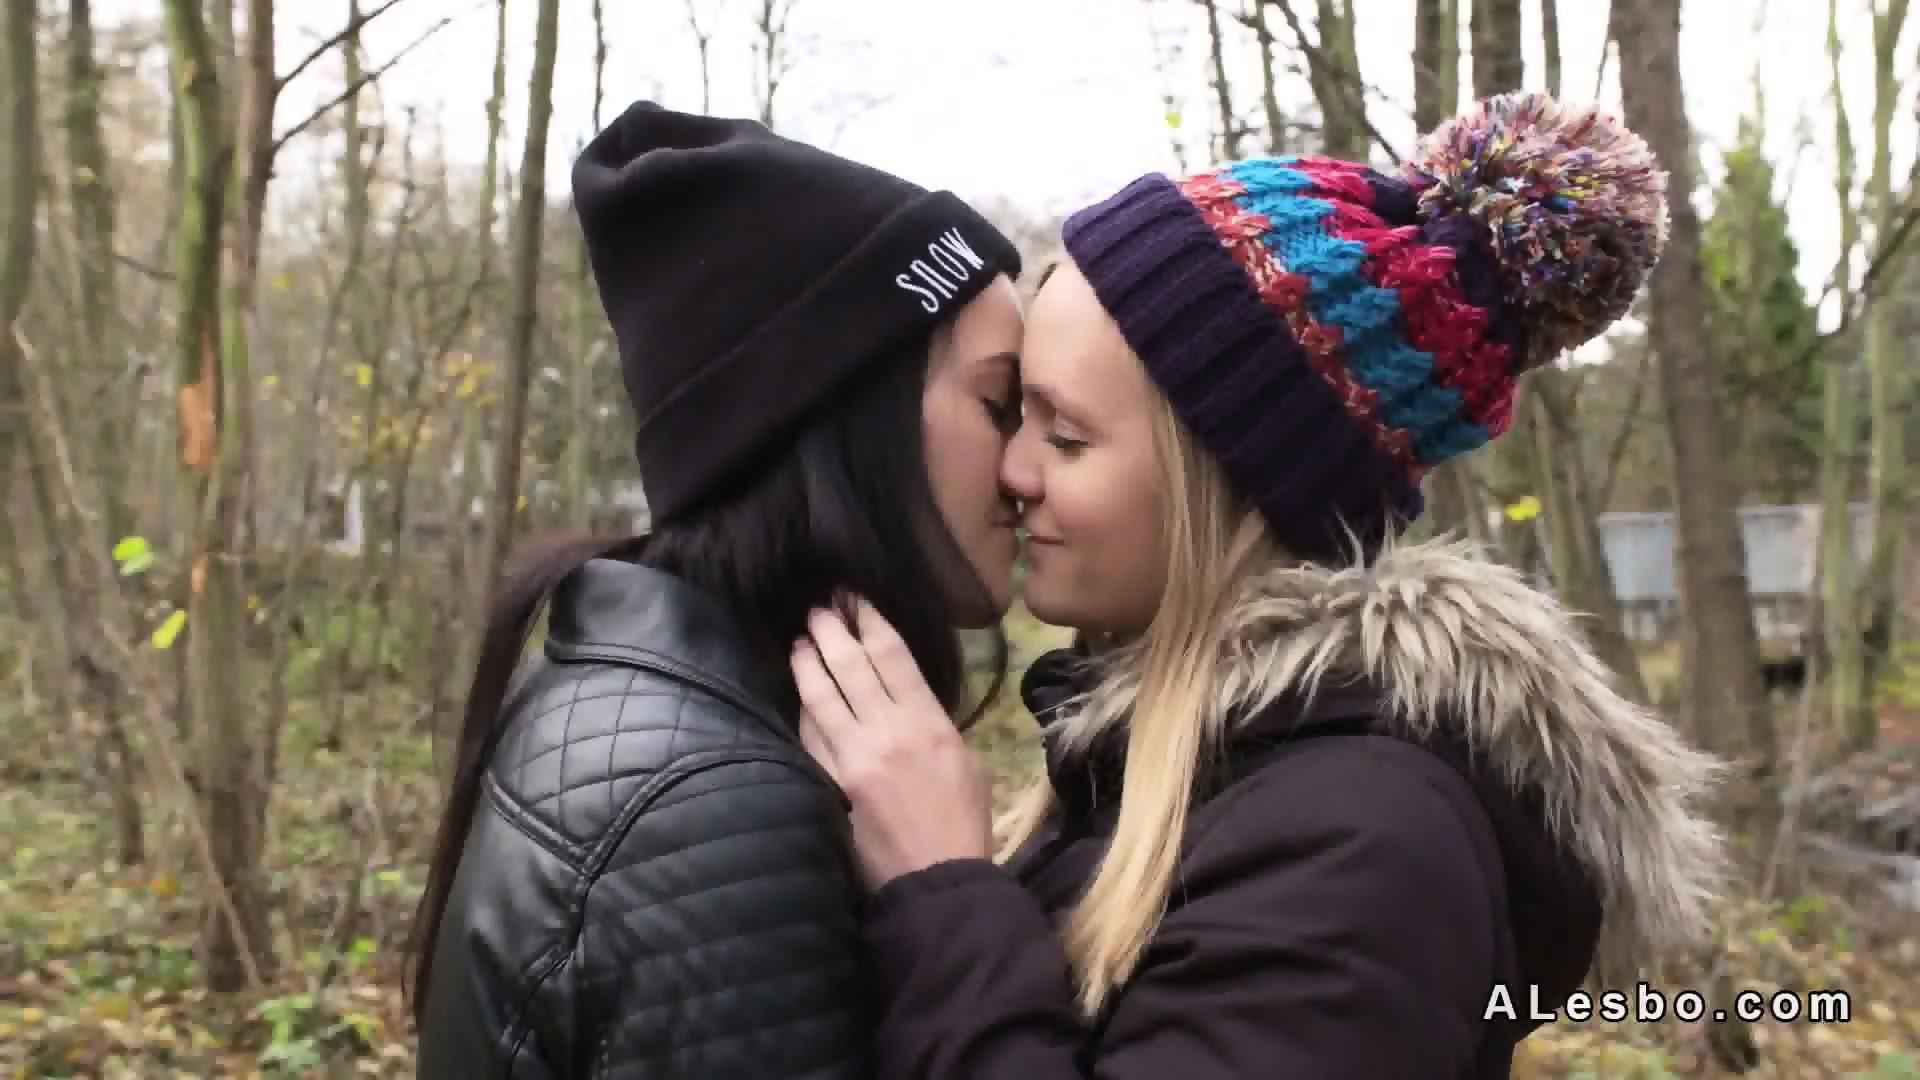 Naked Lesbians In The Forest - Lesbians In Love Kissing In Forest - EPORNER